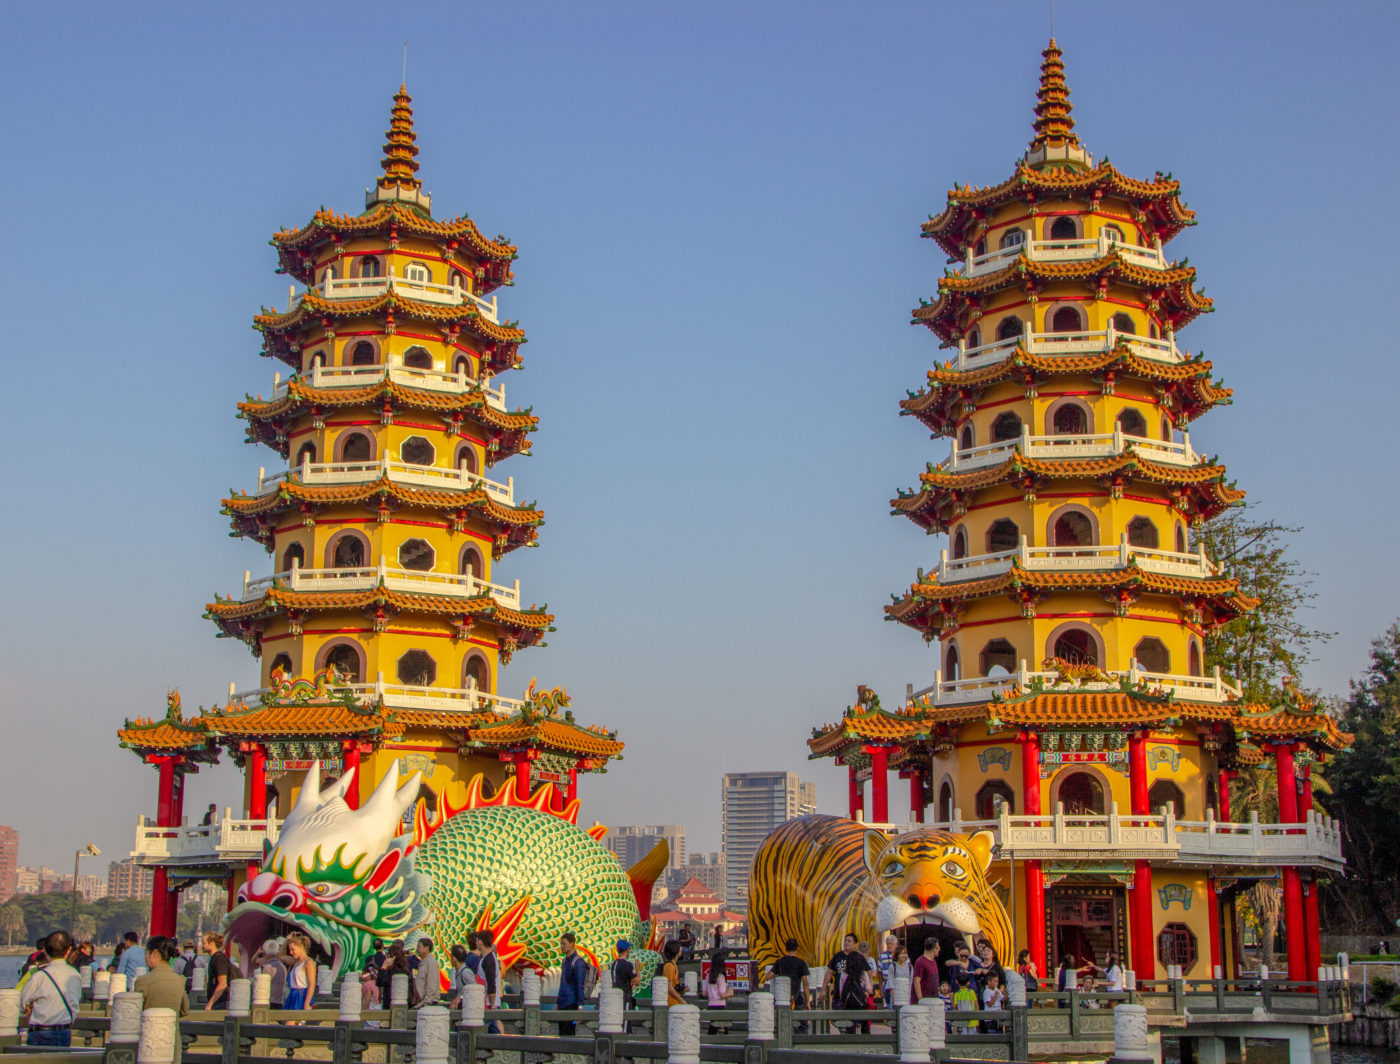 The Colorful Temples of Lotus Pond in Kaohsiung City